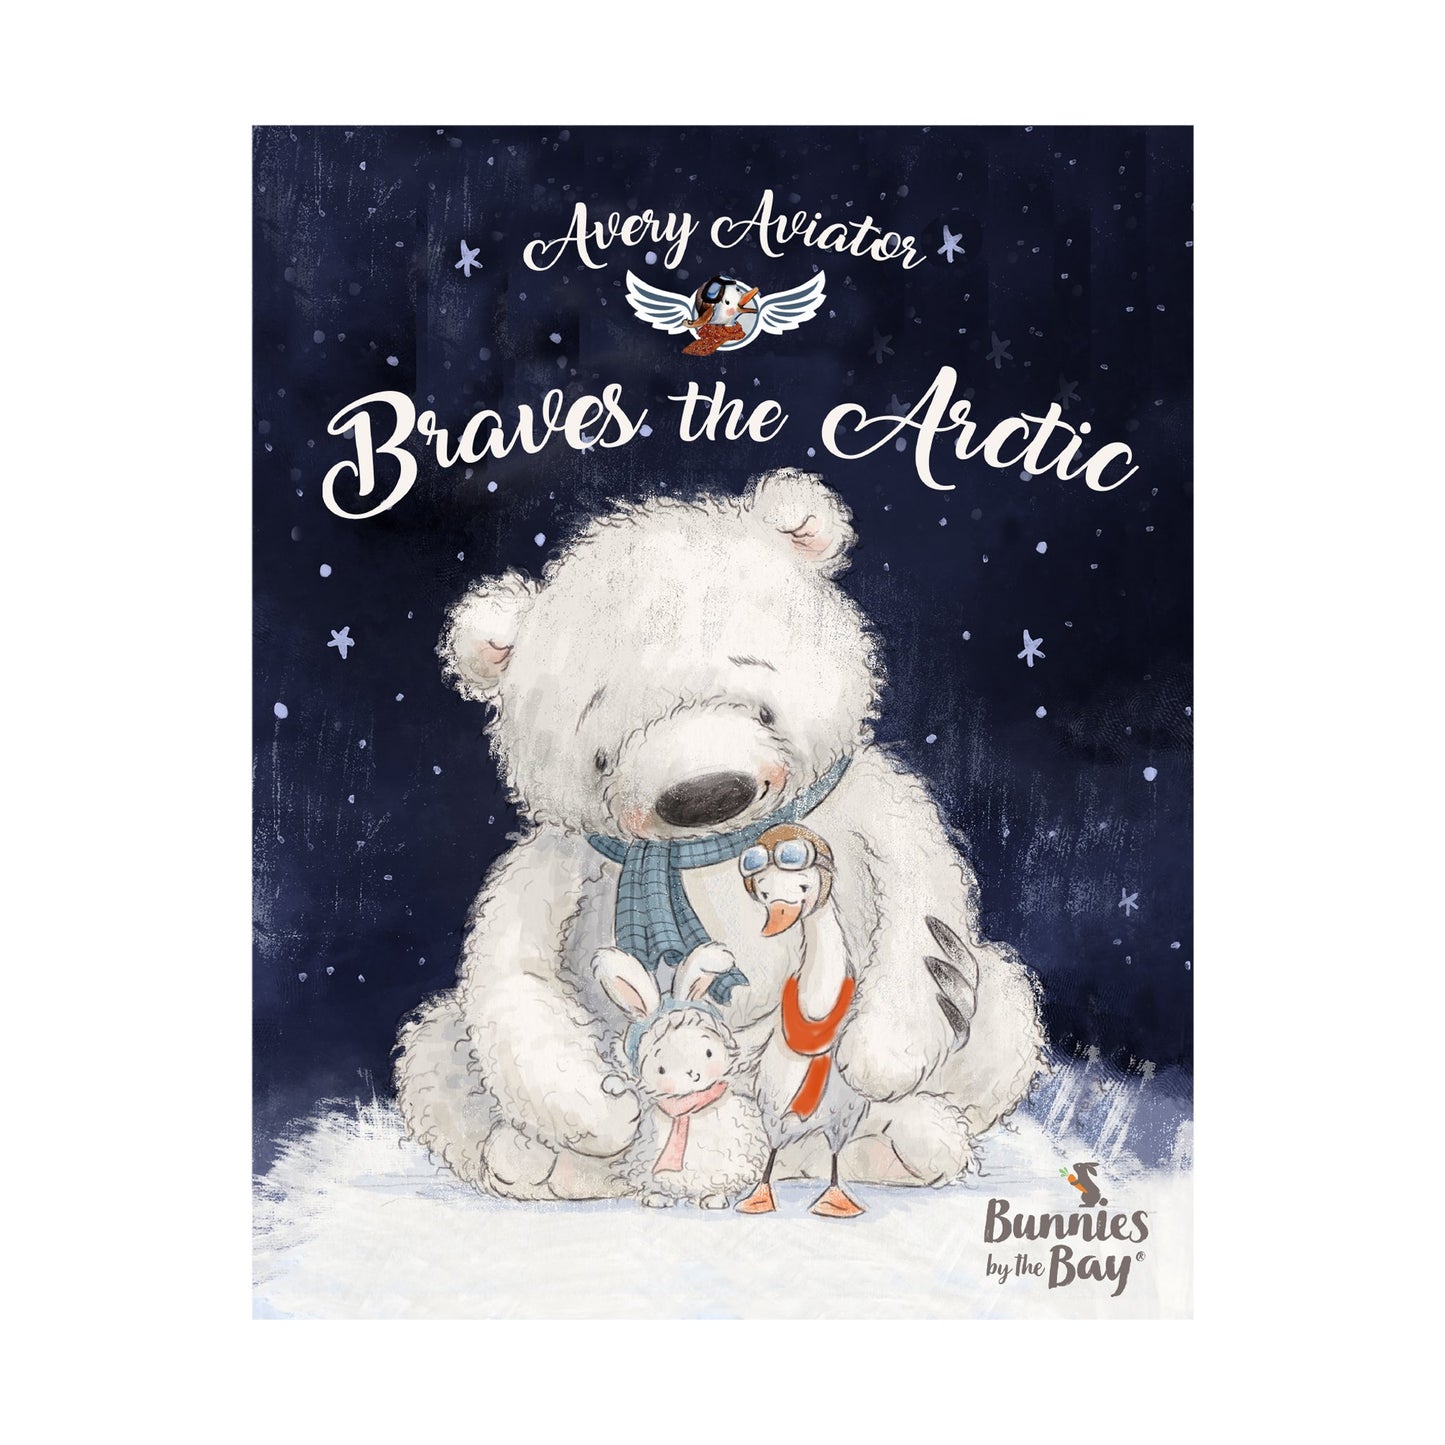 Bunnies By The Bay Avery the Aviator braves the Arctic book